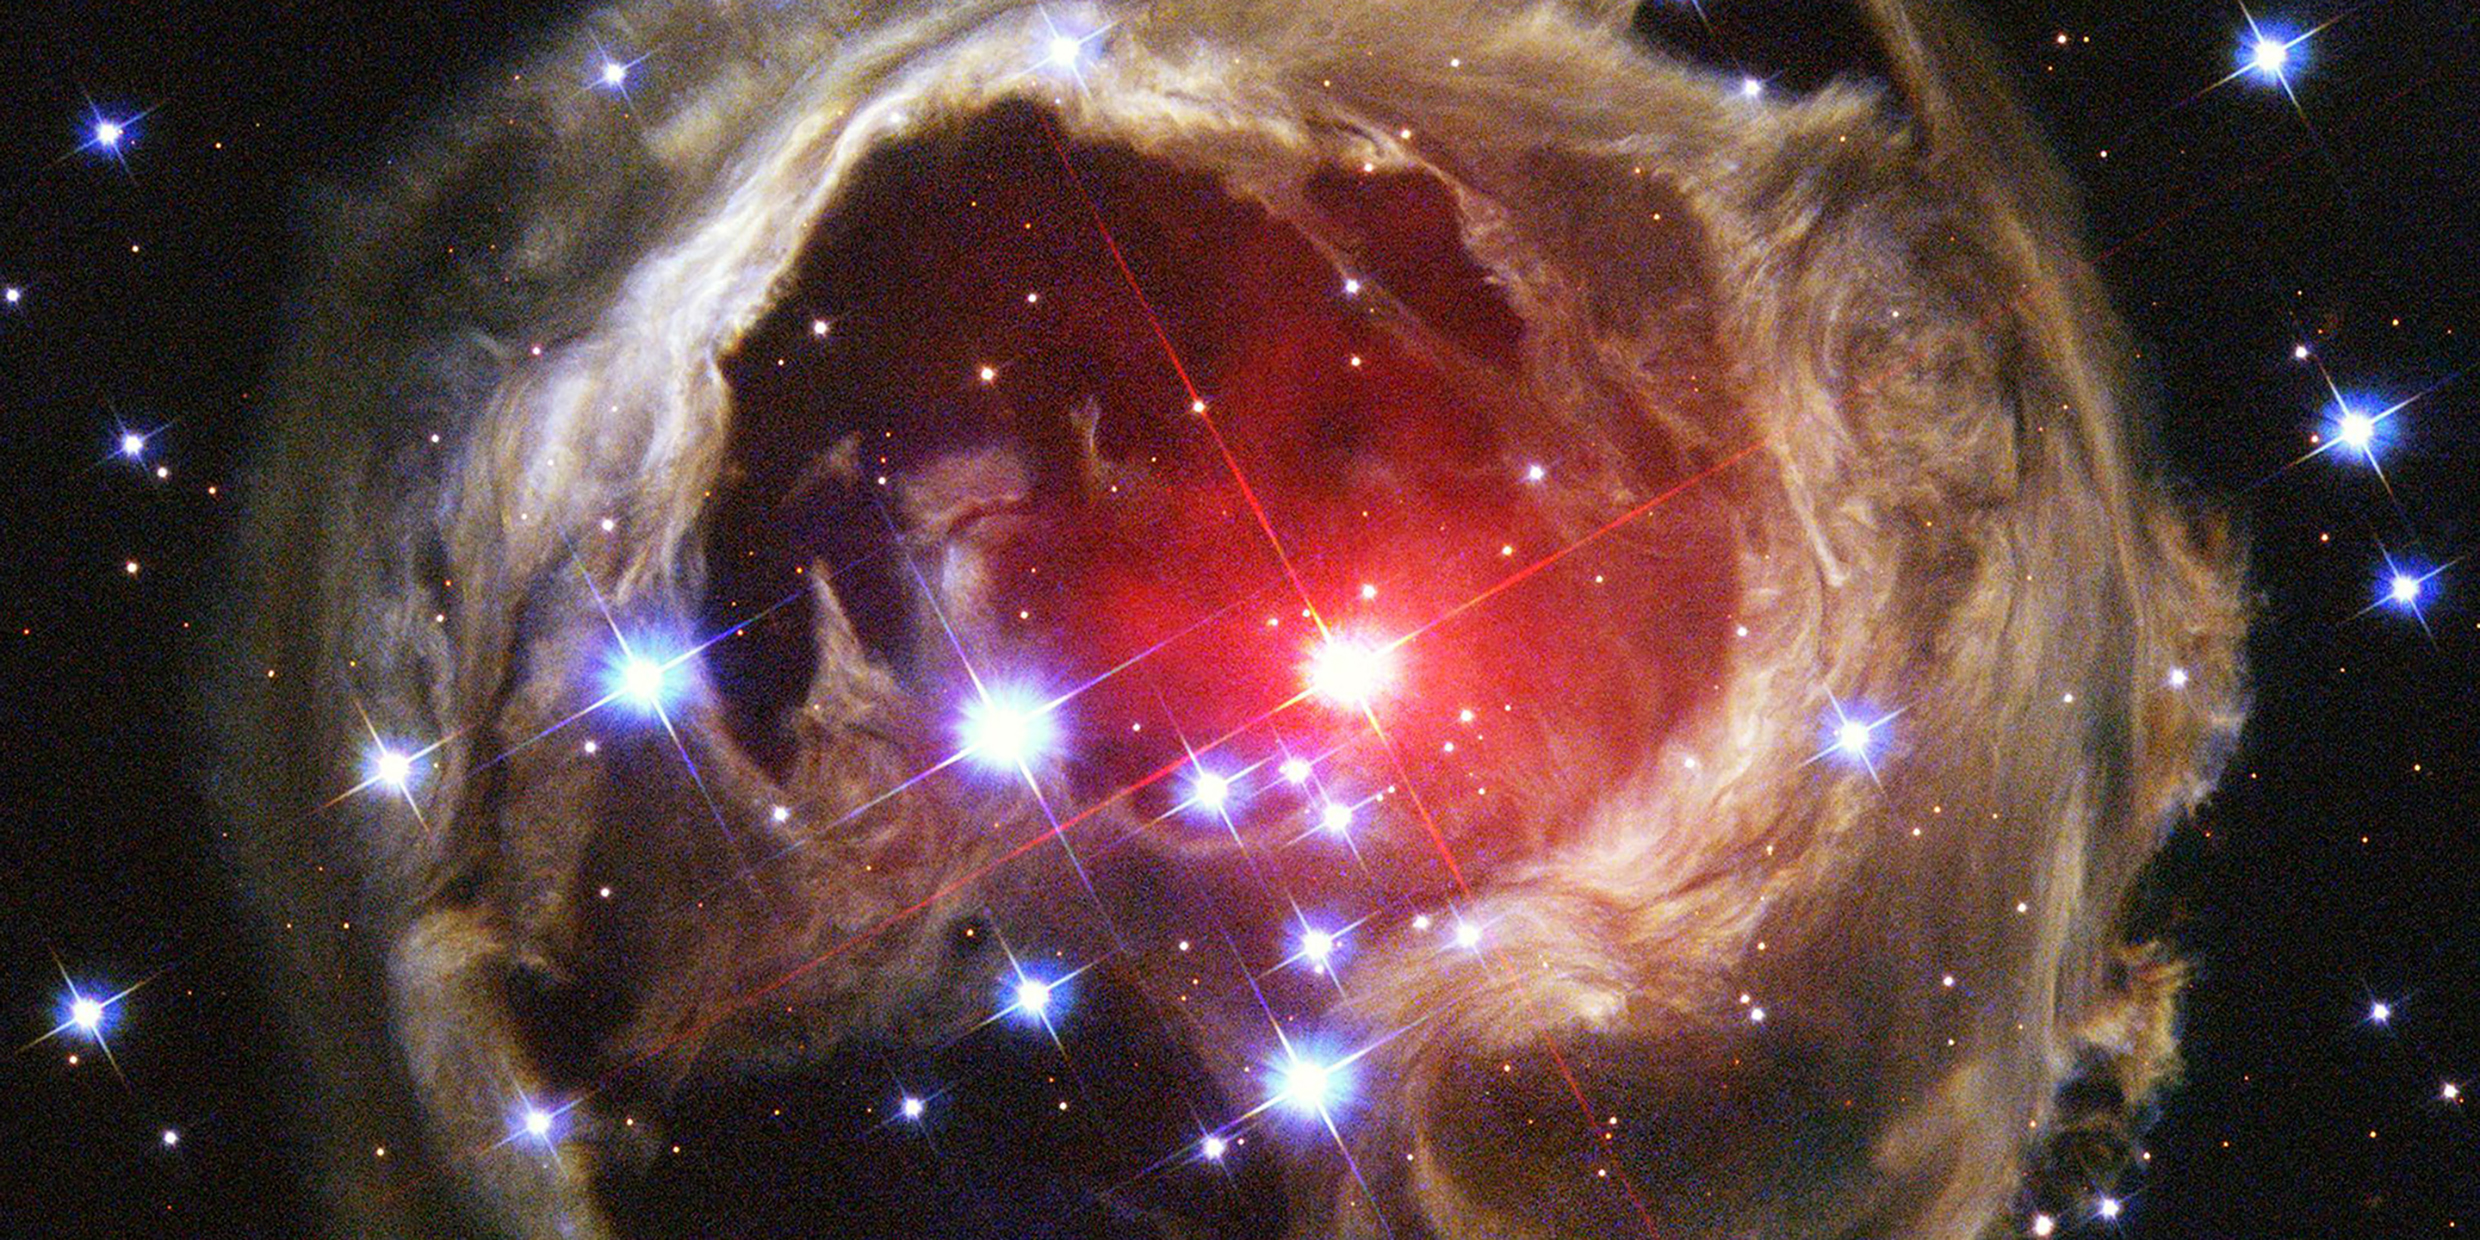 Astronomical image of a ruby-red star surrounded by a dust cloud